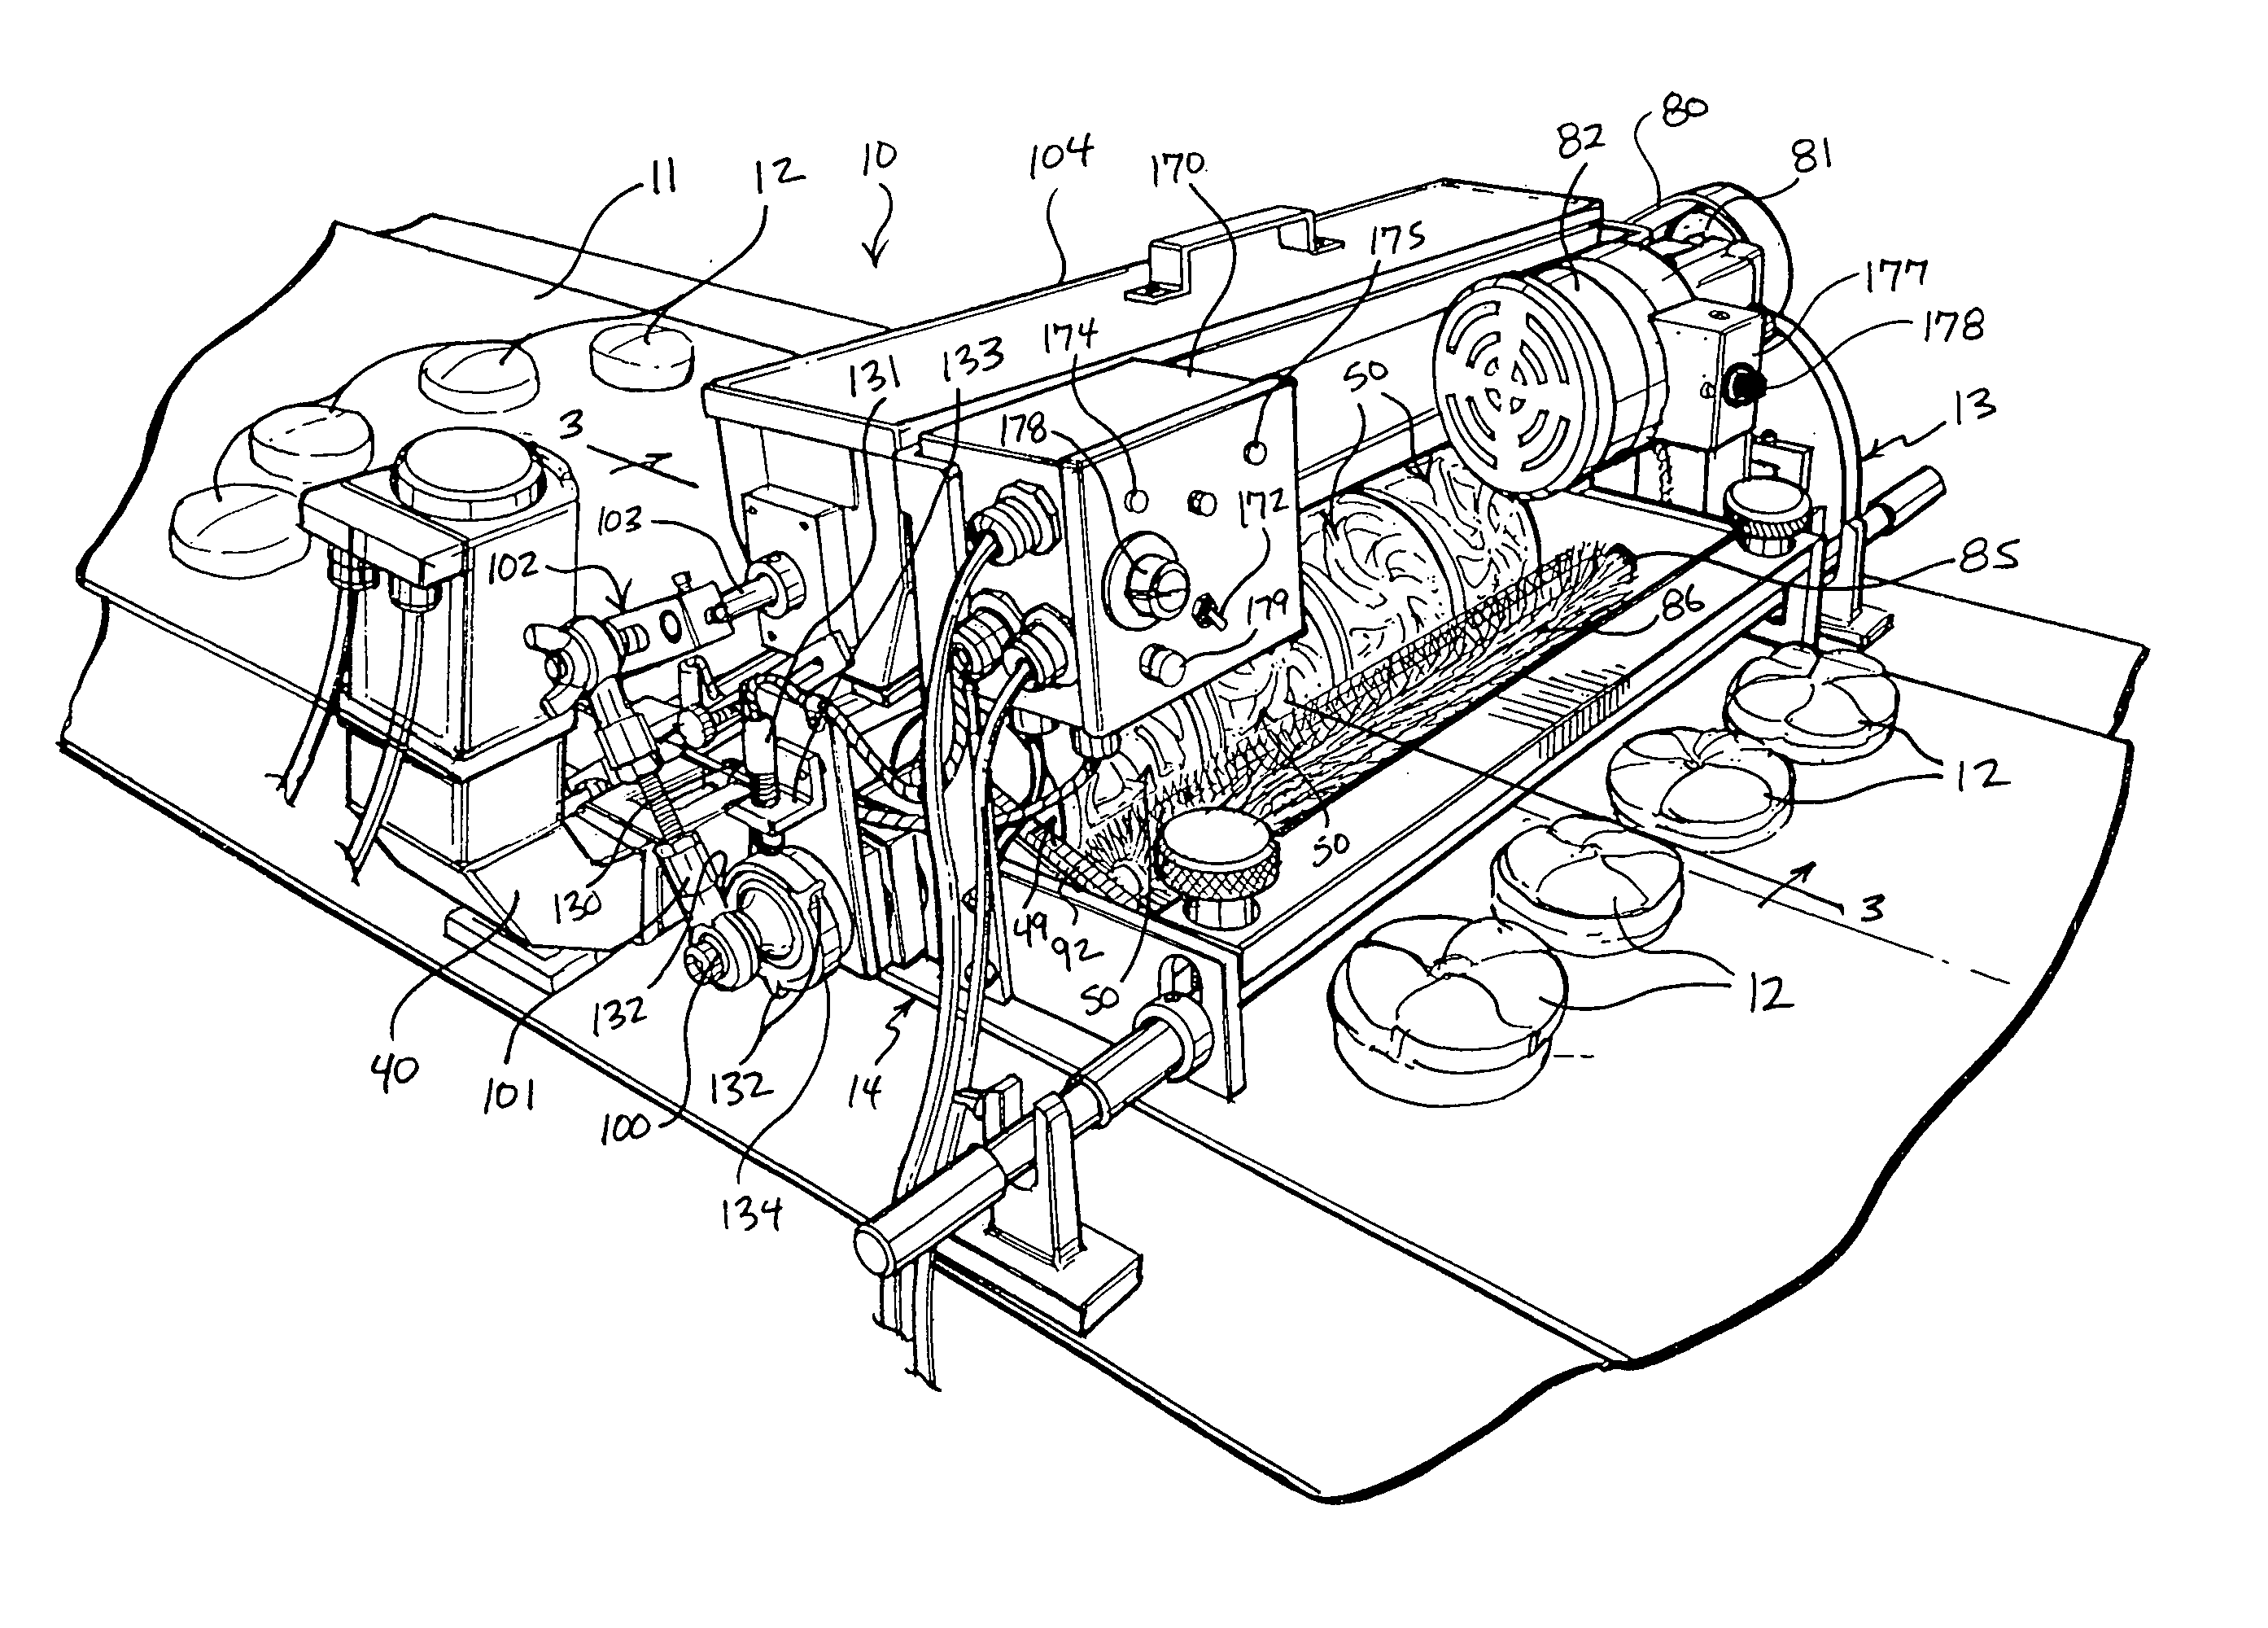 Roll-forming apparatus